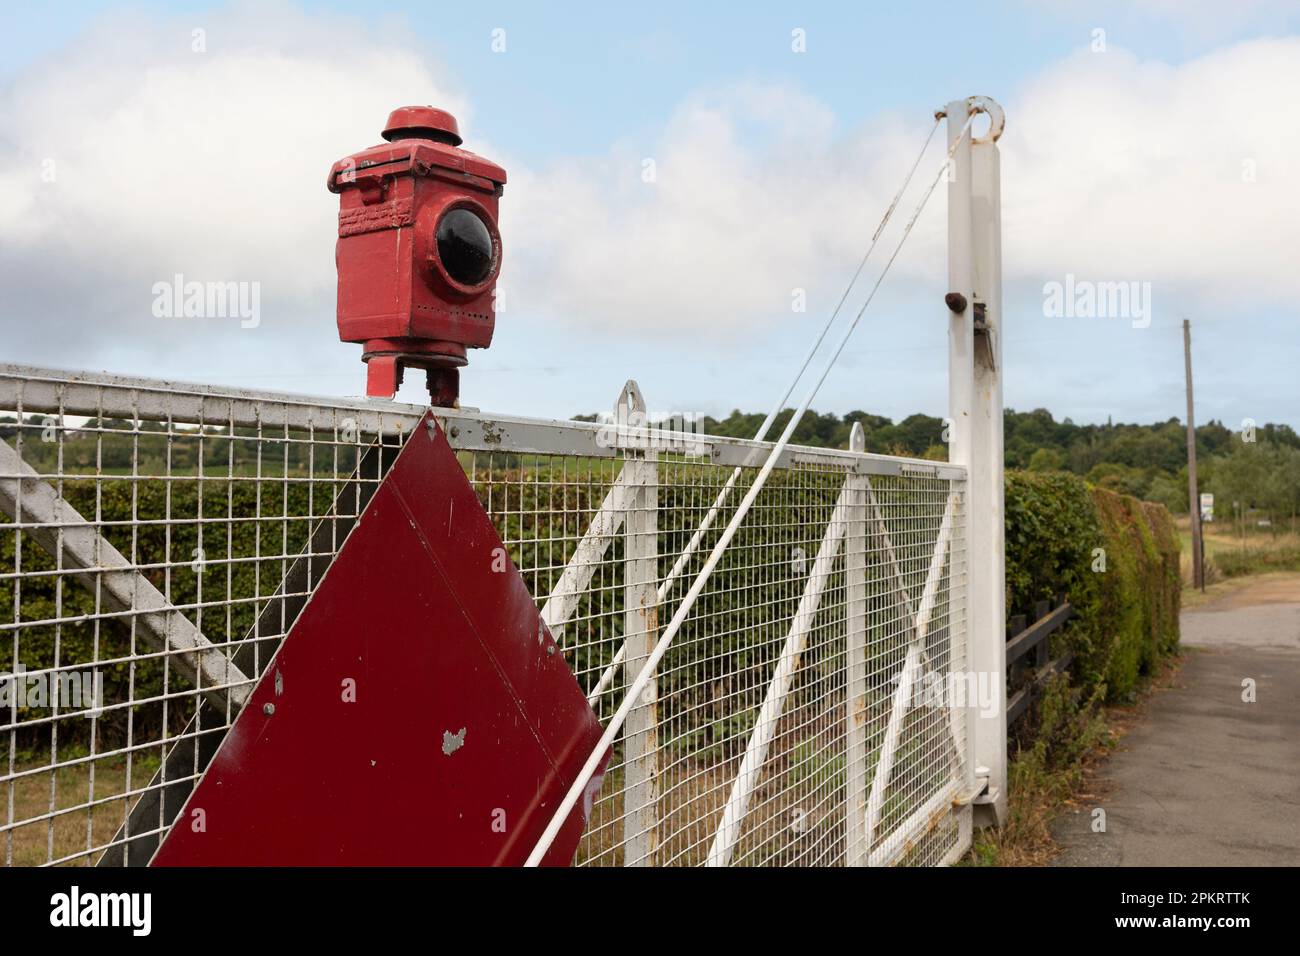 Close-up view of a vintage stop lantern seen atop an old railway level crossing Stock Photo